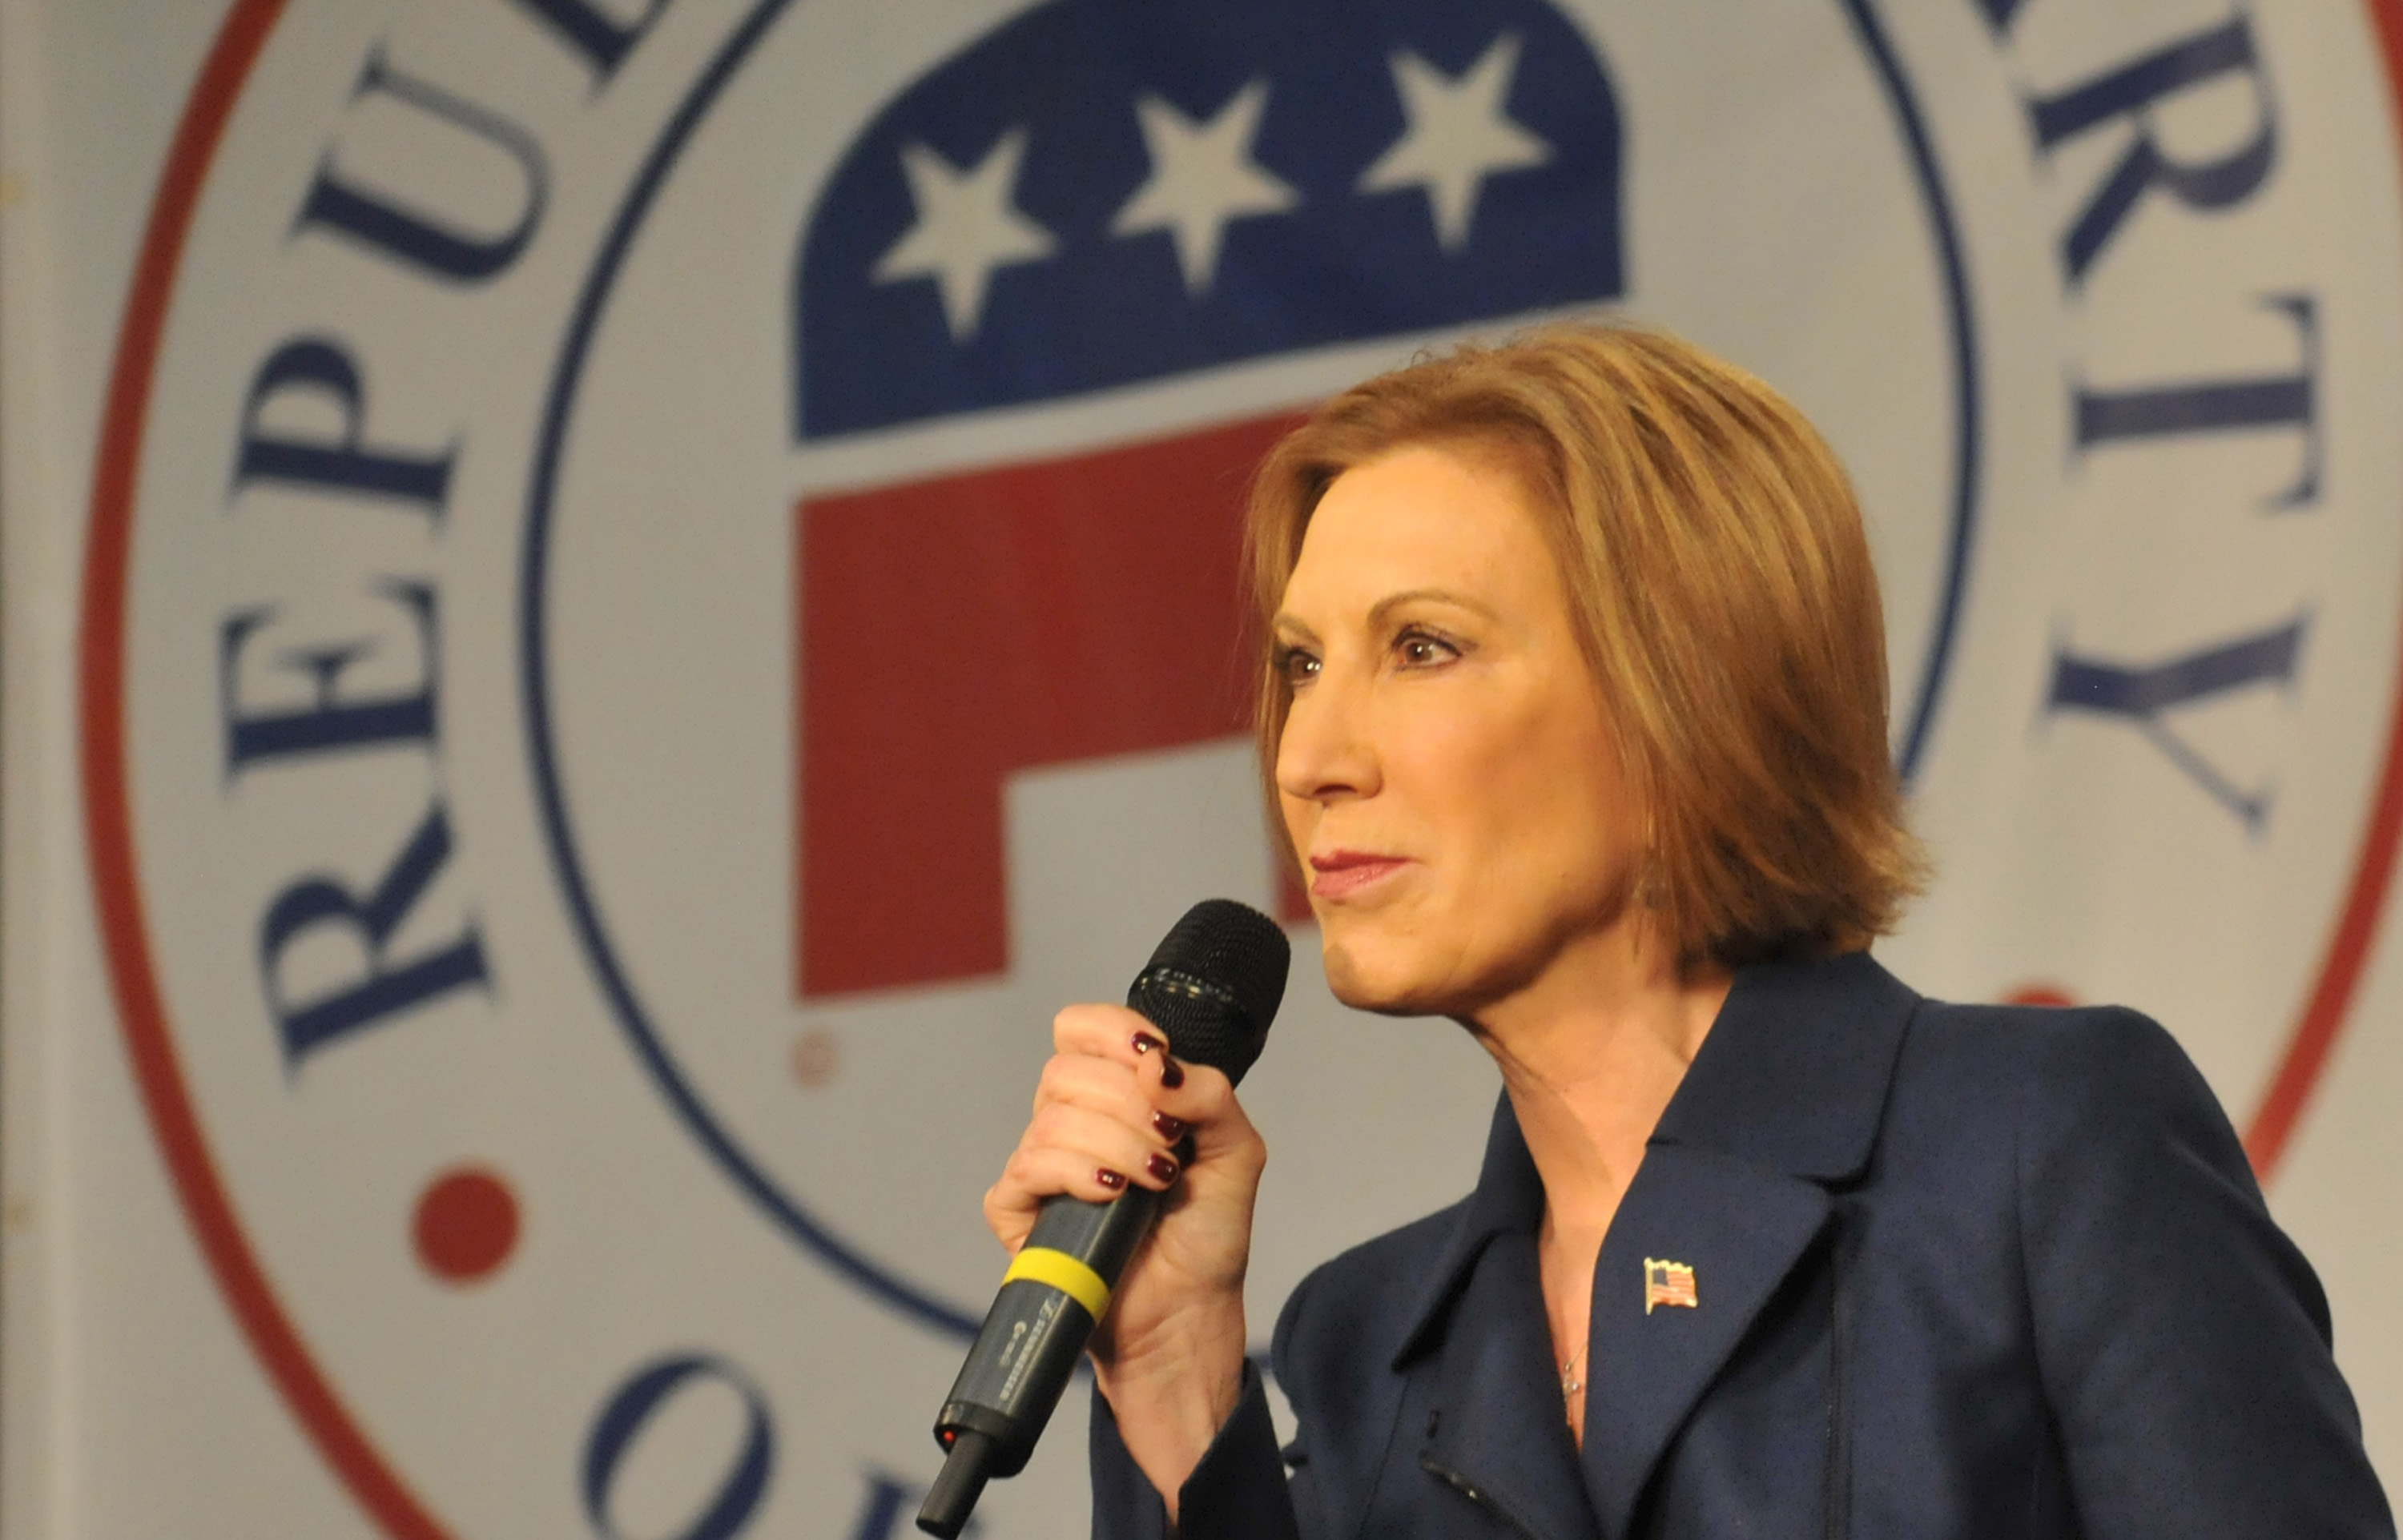 Republican presidential candidate Carly Fiorina speaks at the Growth and Opportunity Party, at the Iowa State Fair on Oct. 31, 2015. (Steve Pope—Getty Images)